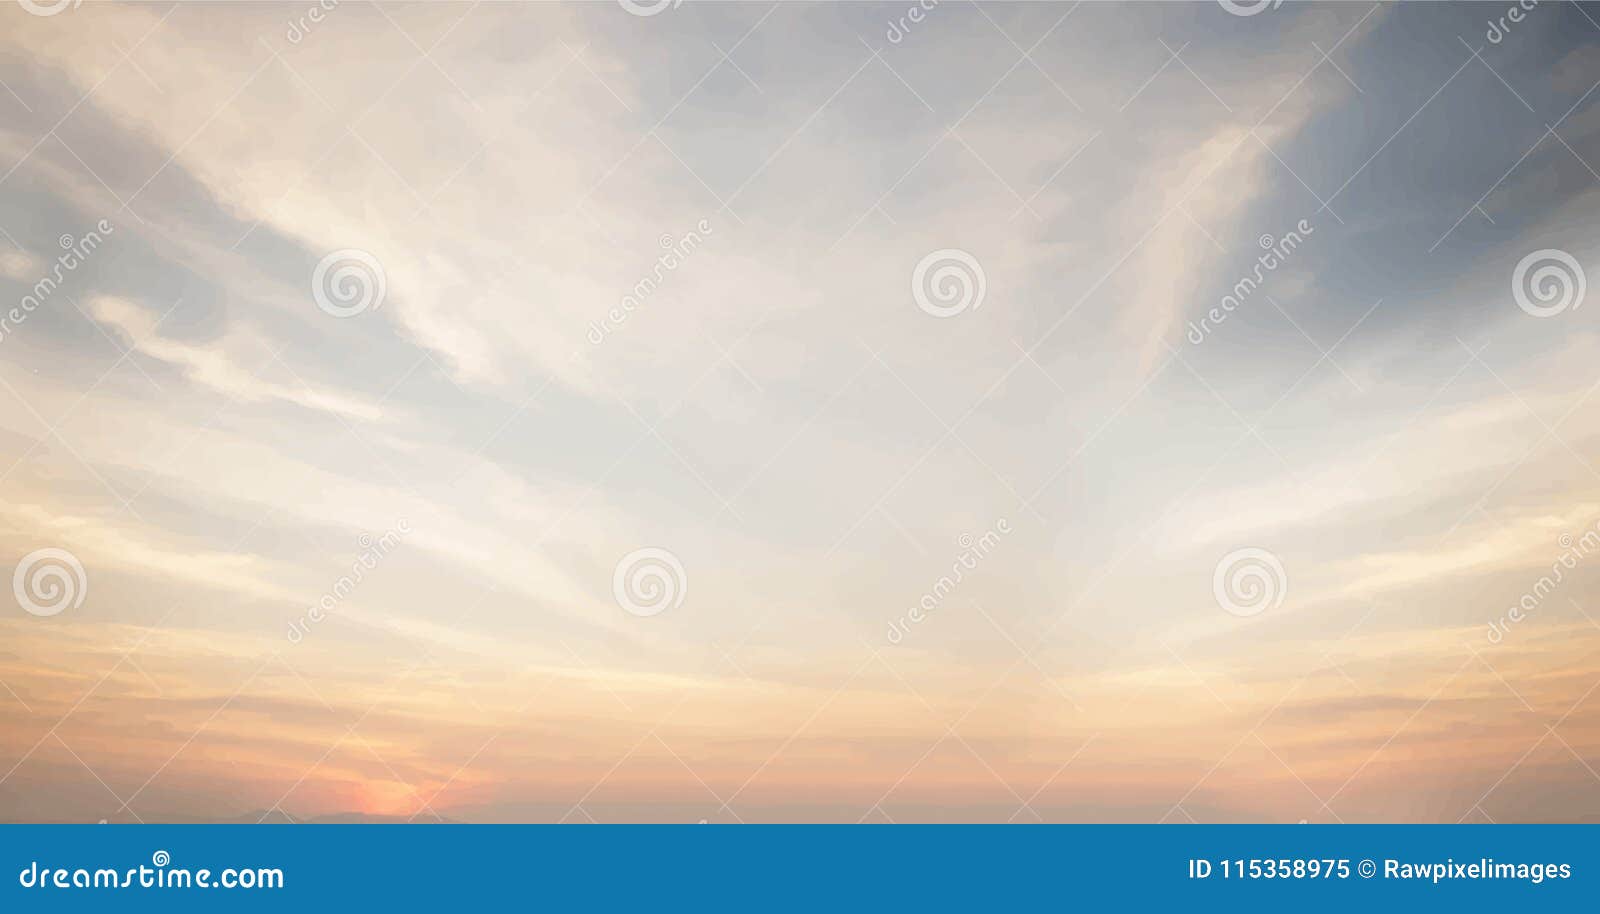 sunset and cloudy blue sky wallpaper